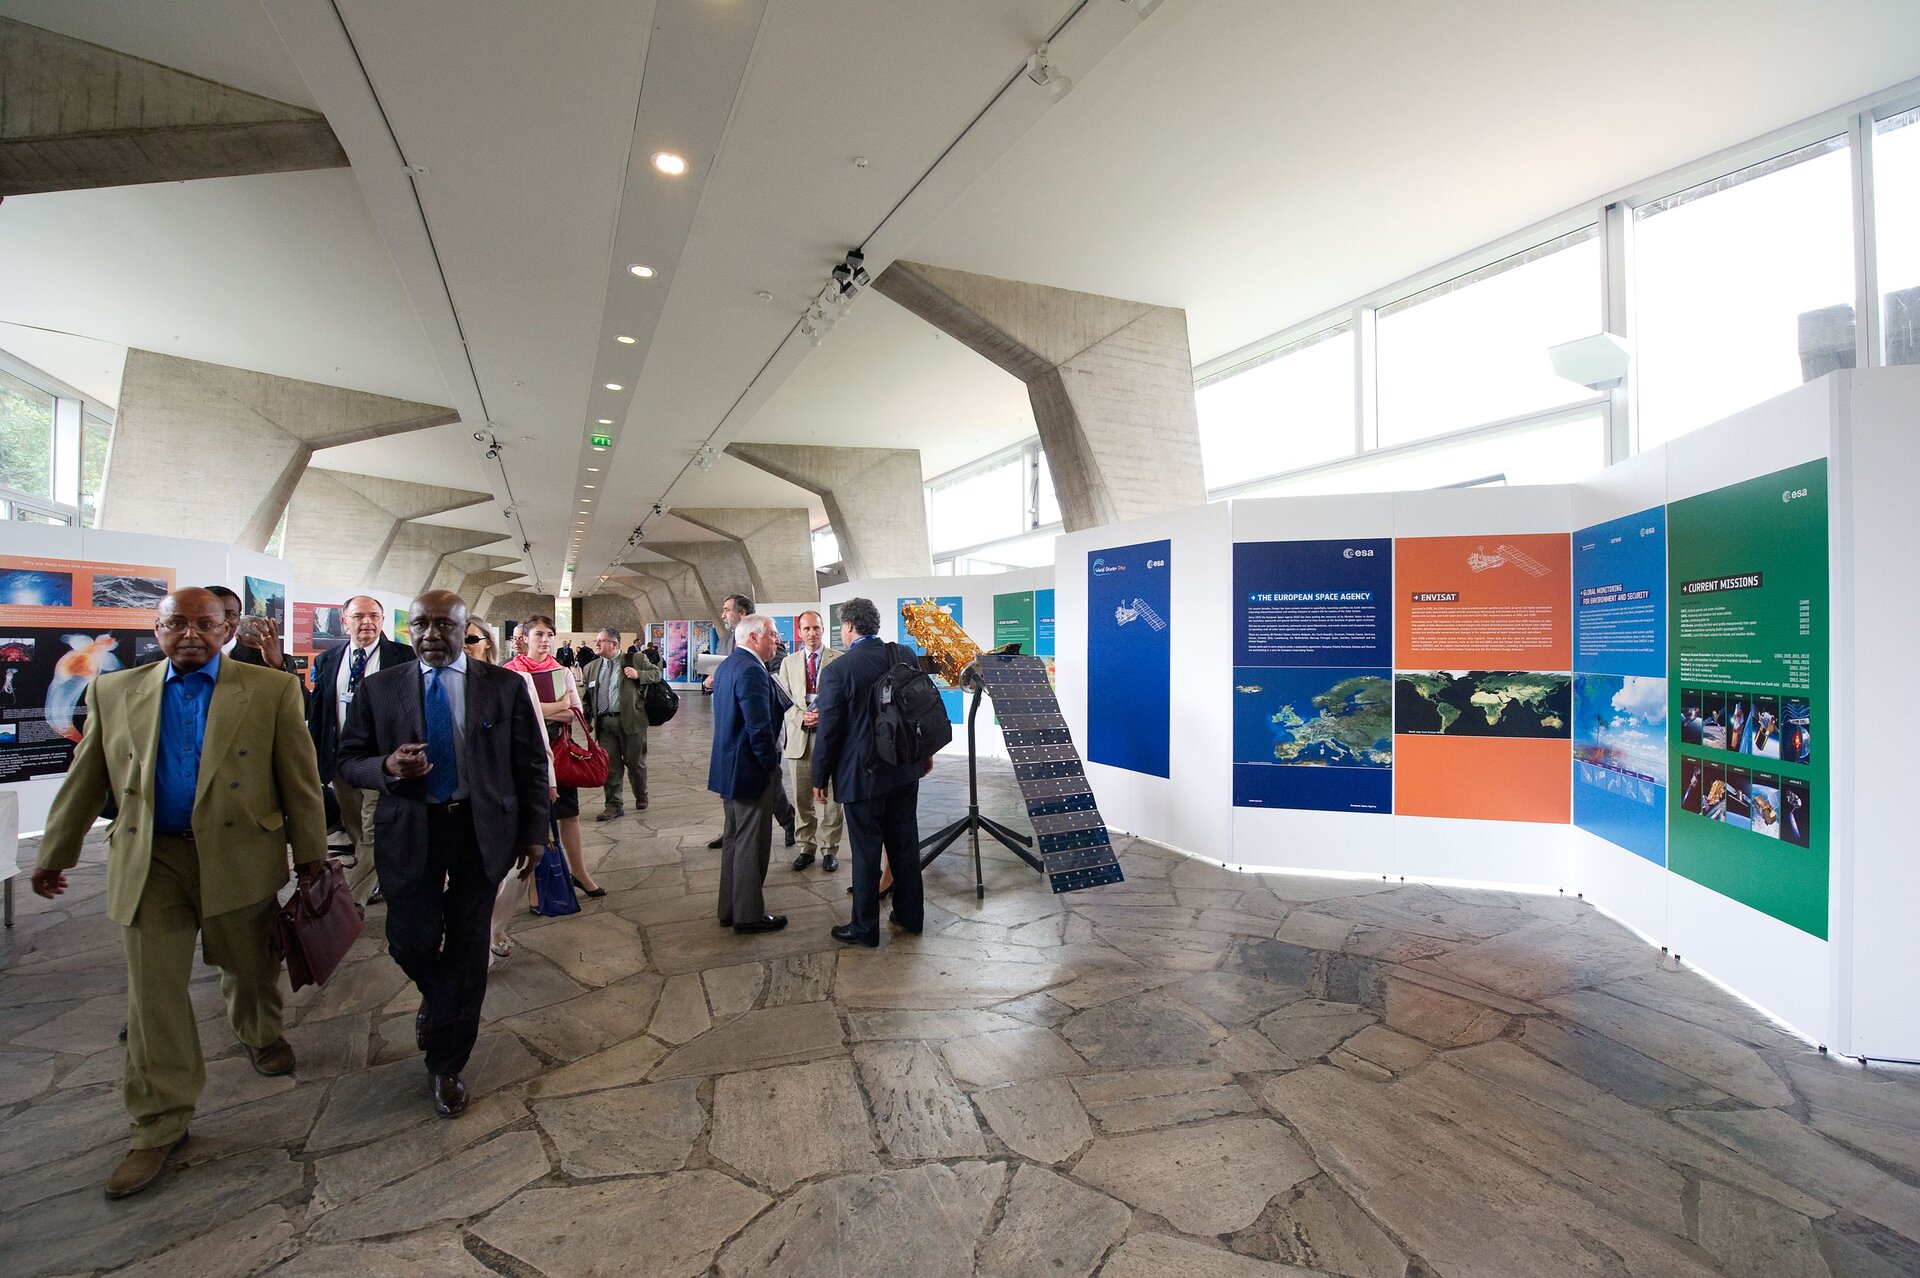 Exhibition in the main foyer of UNESCO, inaugurated on 8 June